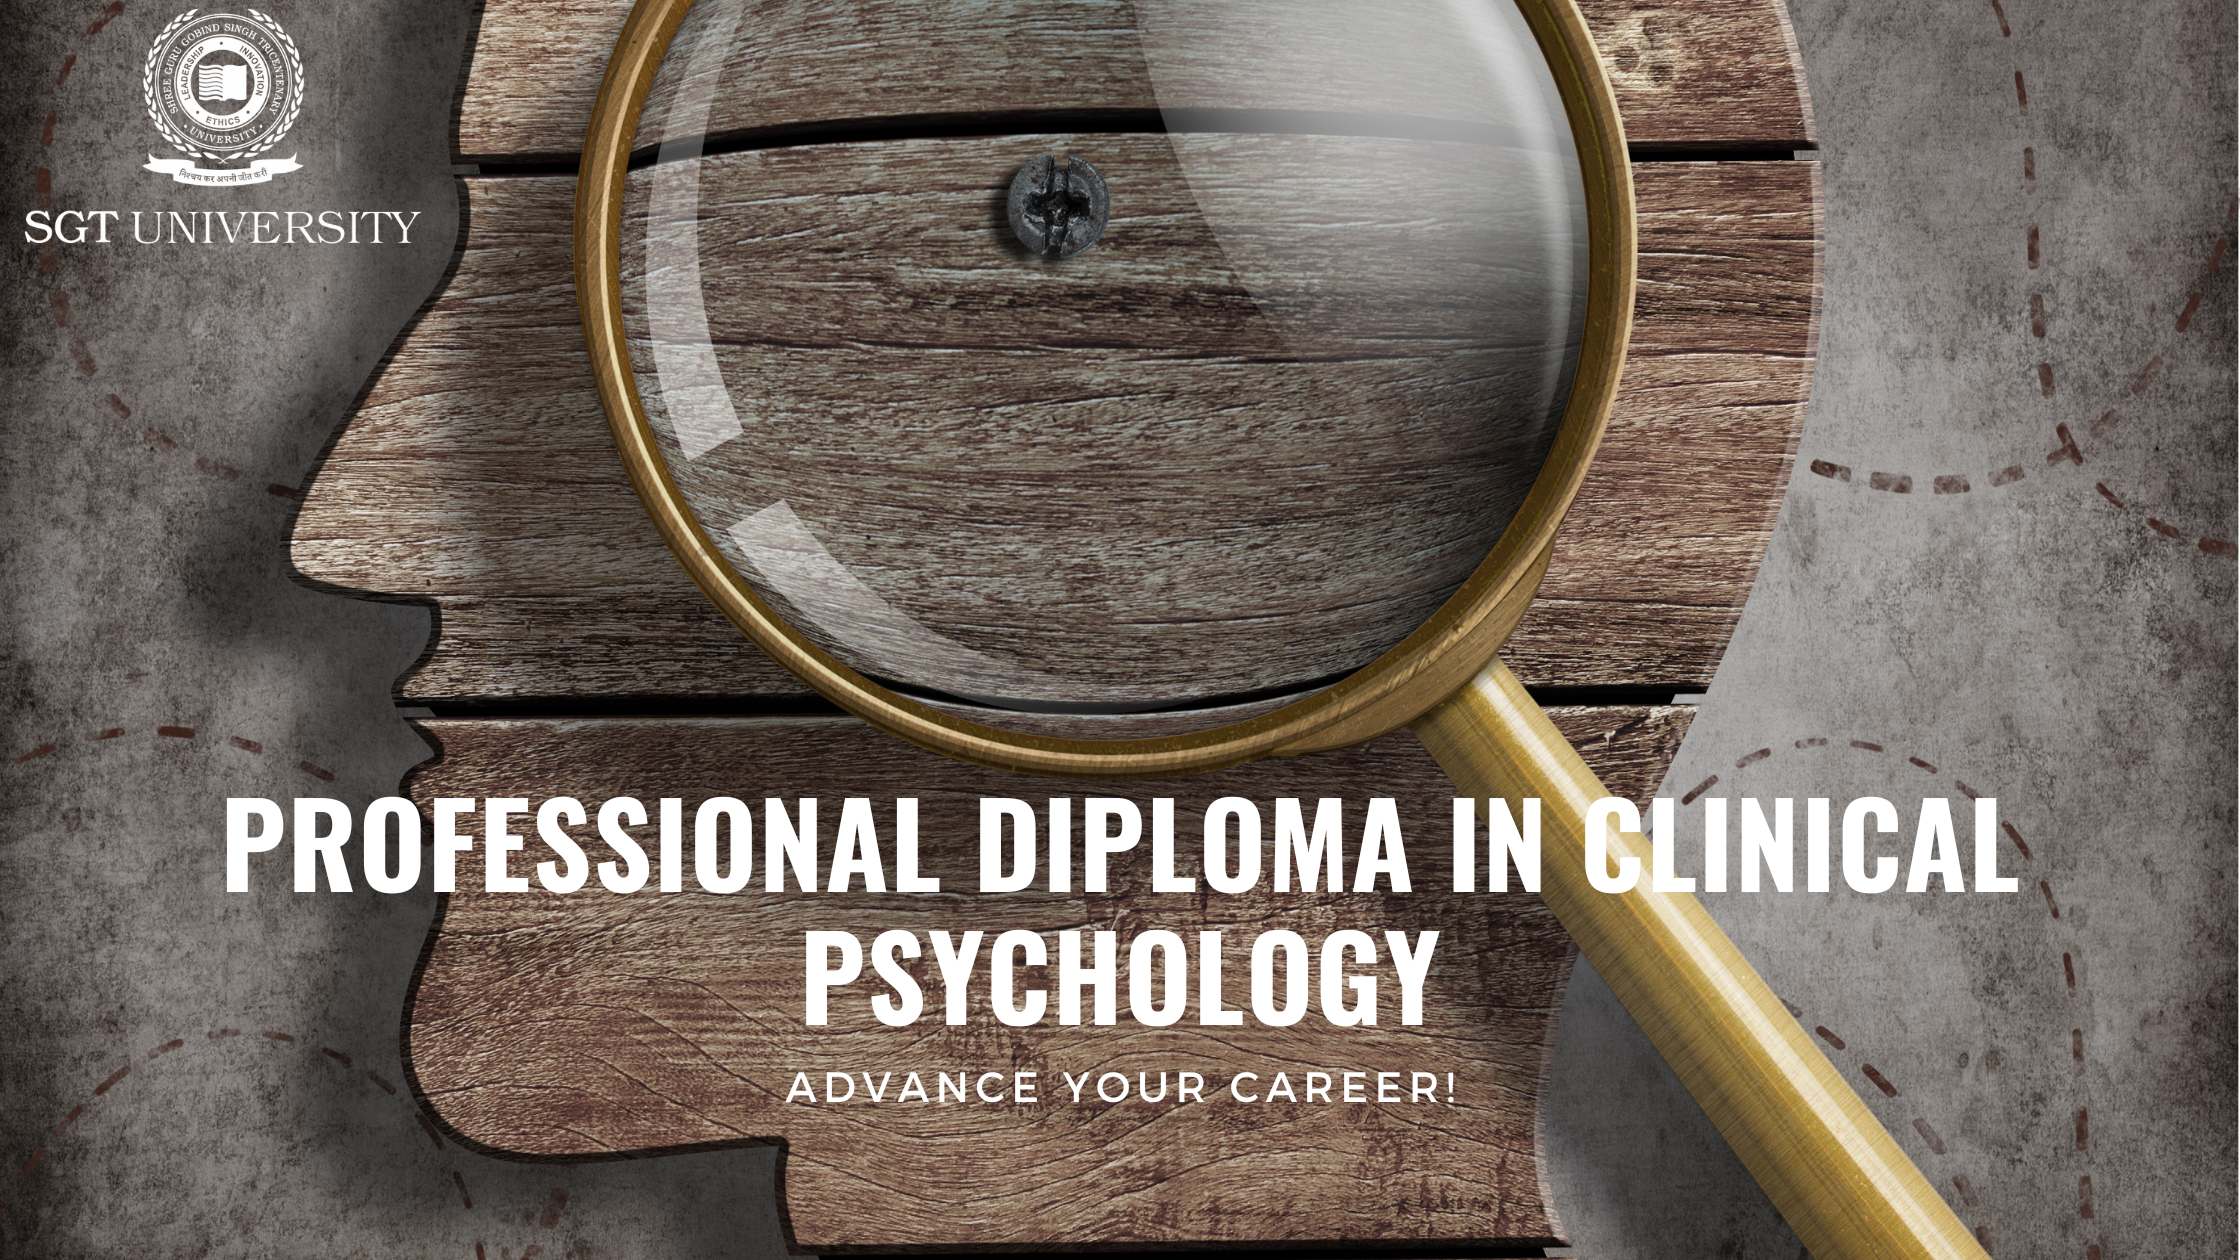 Advance Your Career with a Professional Diploma in Clinical Psychology